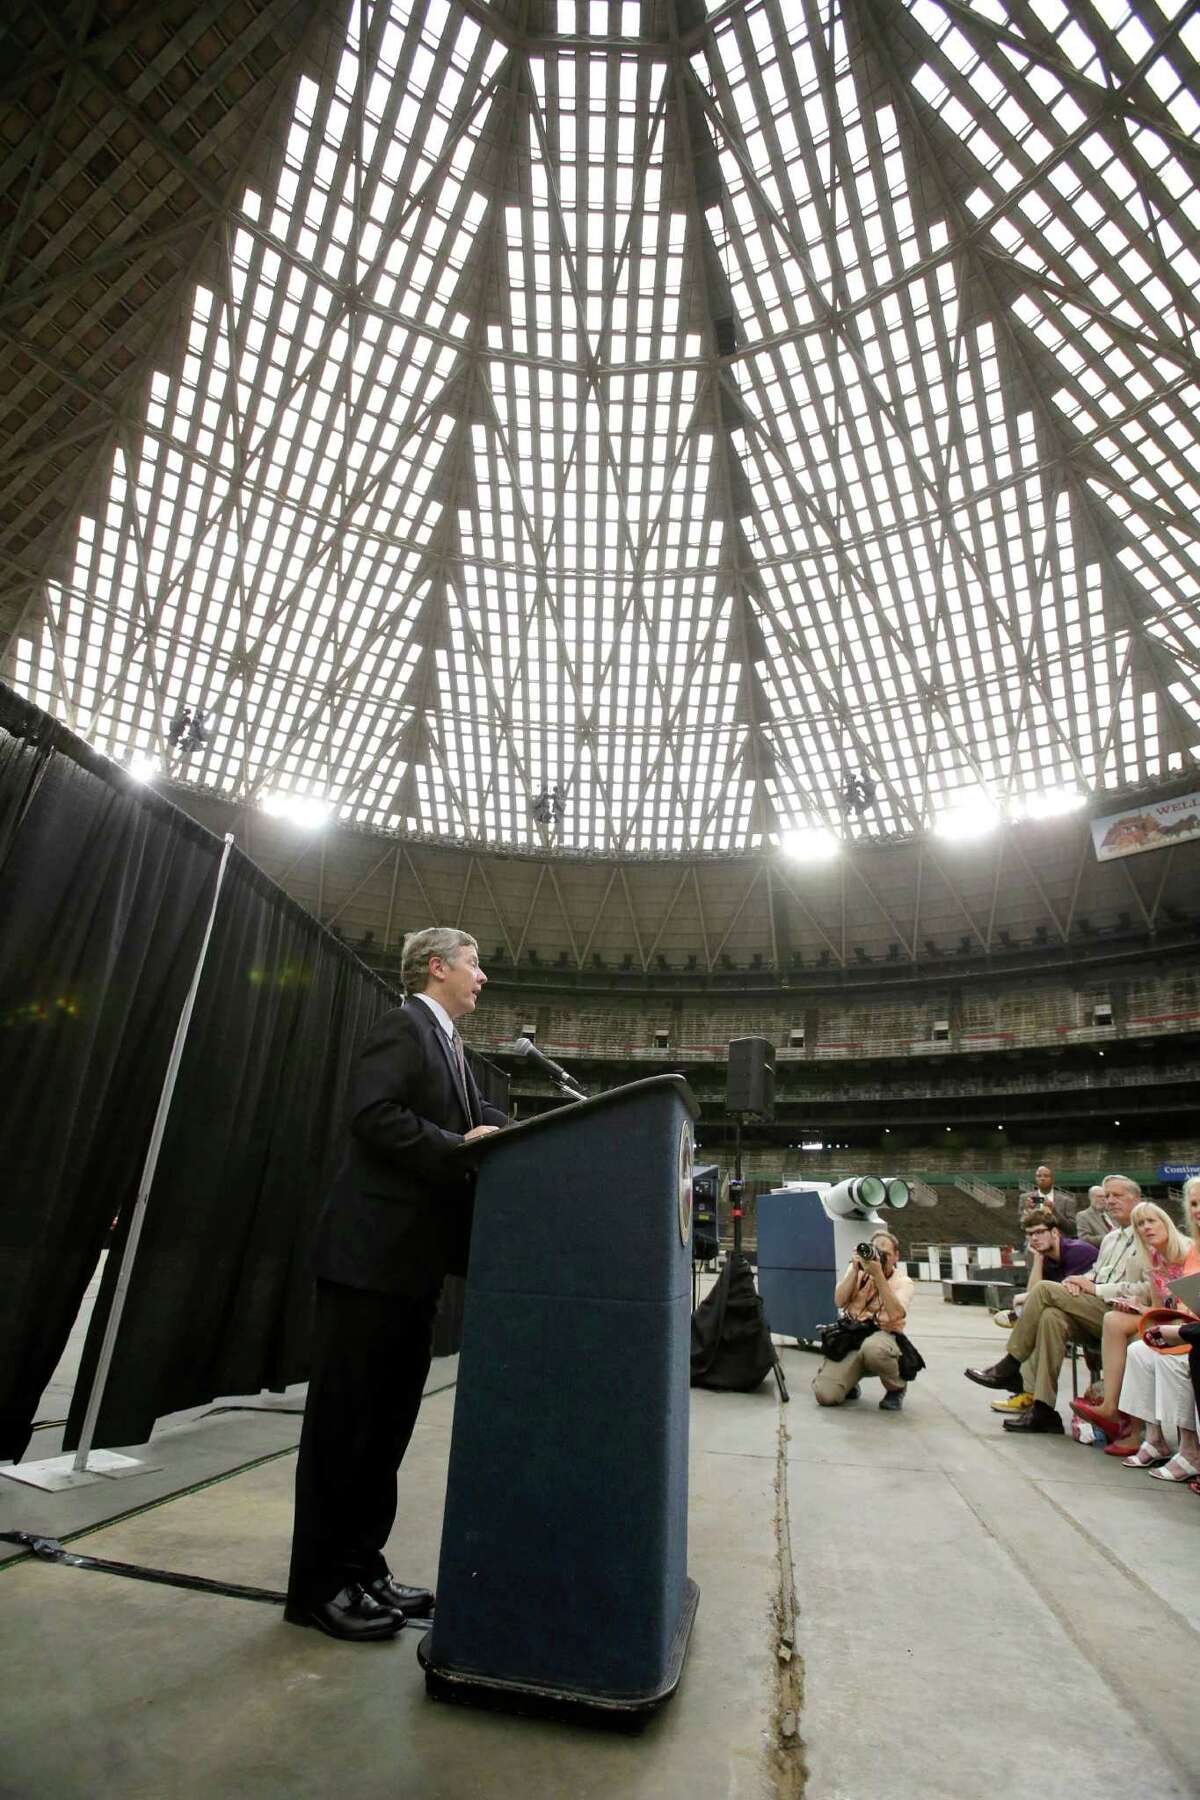 Harris County Judge Ed Emmett makes his suggestion to turn the Astrodome into the world's largest indoor park during a press conference at the historic domed stadium Tuesday, Aug. 26, 2014, in Houston. (AP Photo/Pat Sullivan)